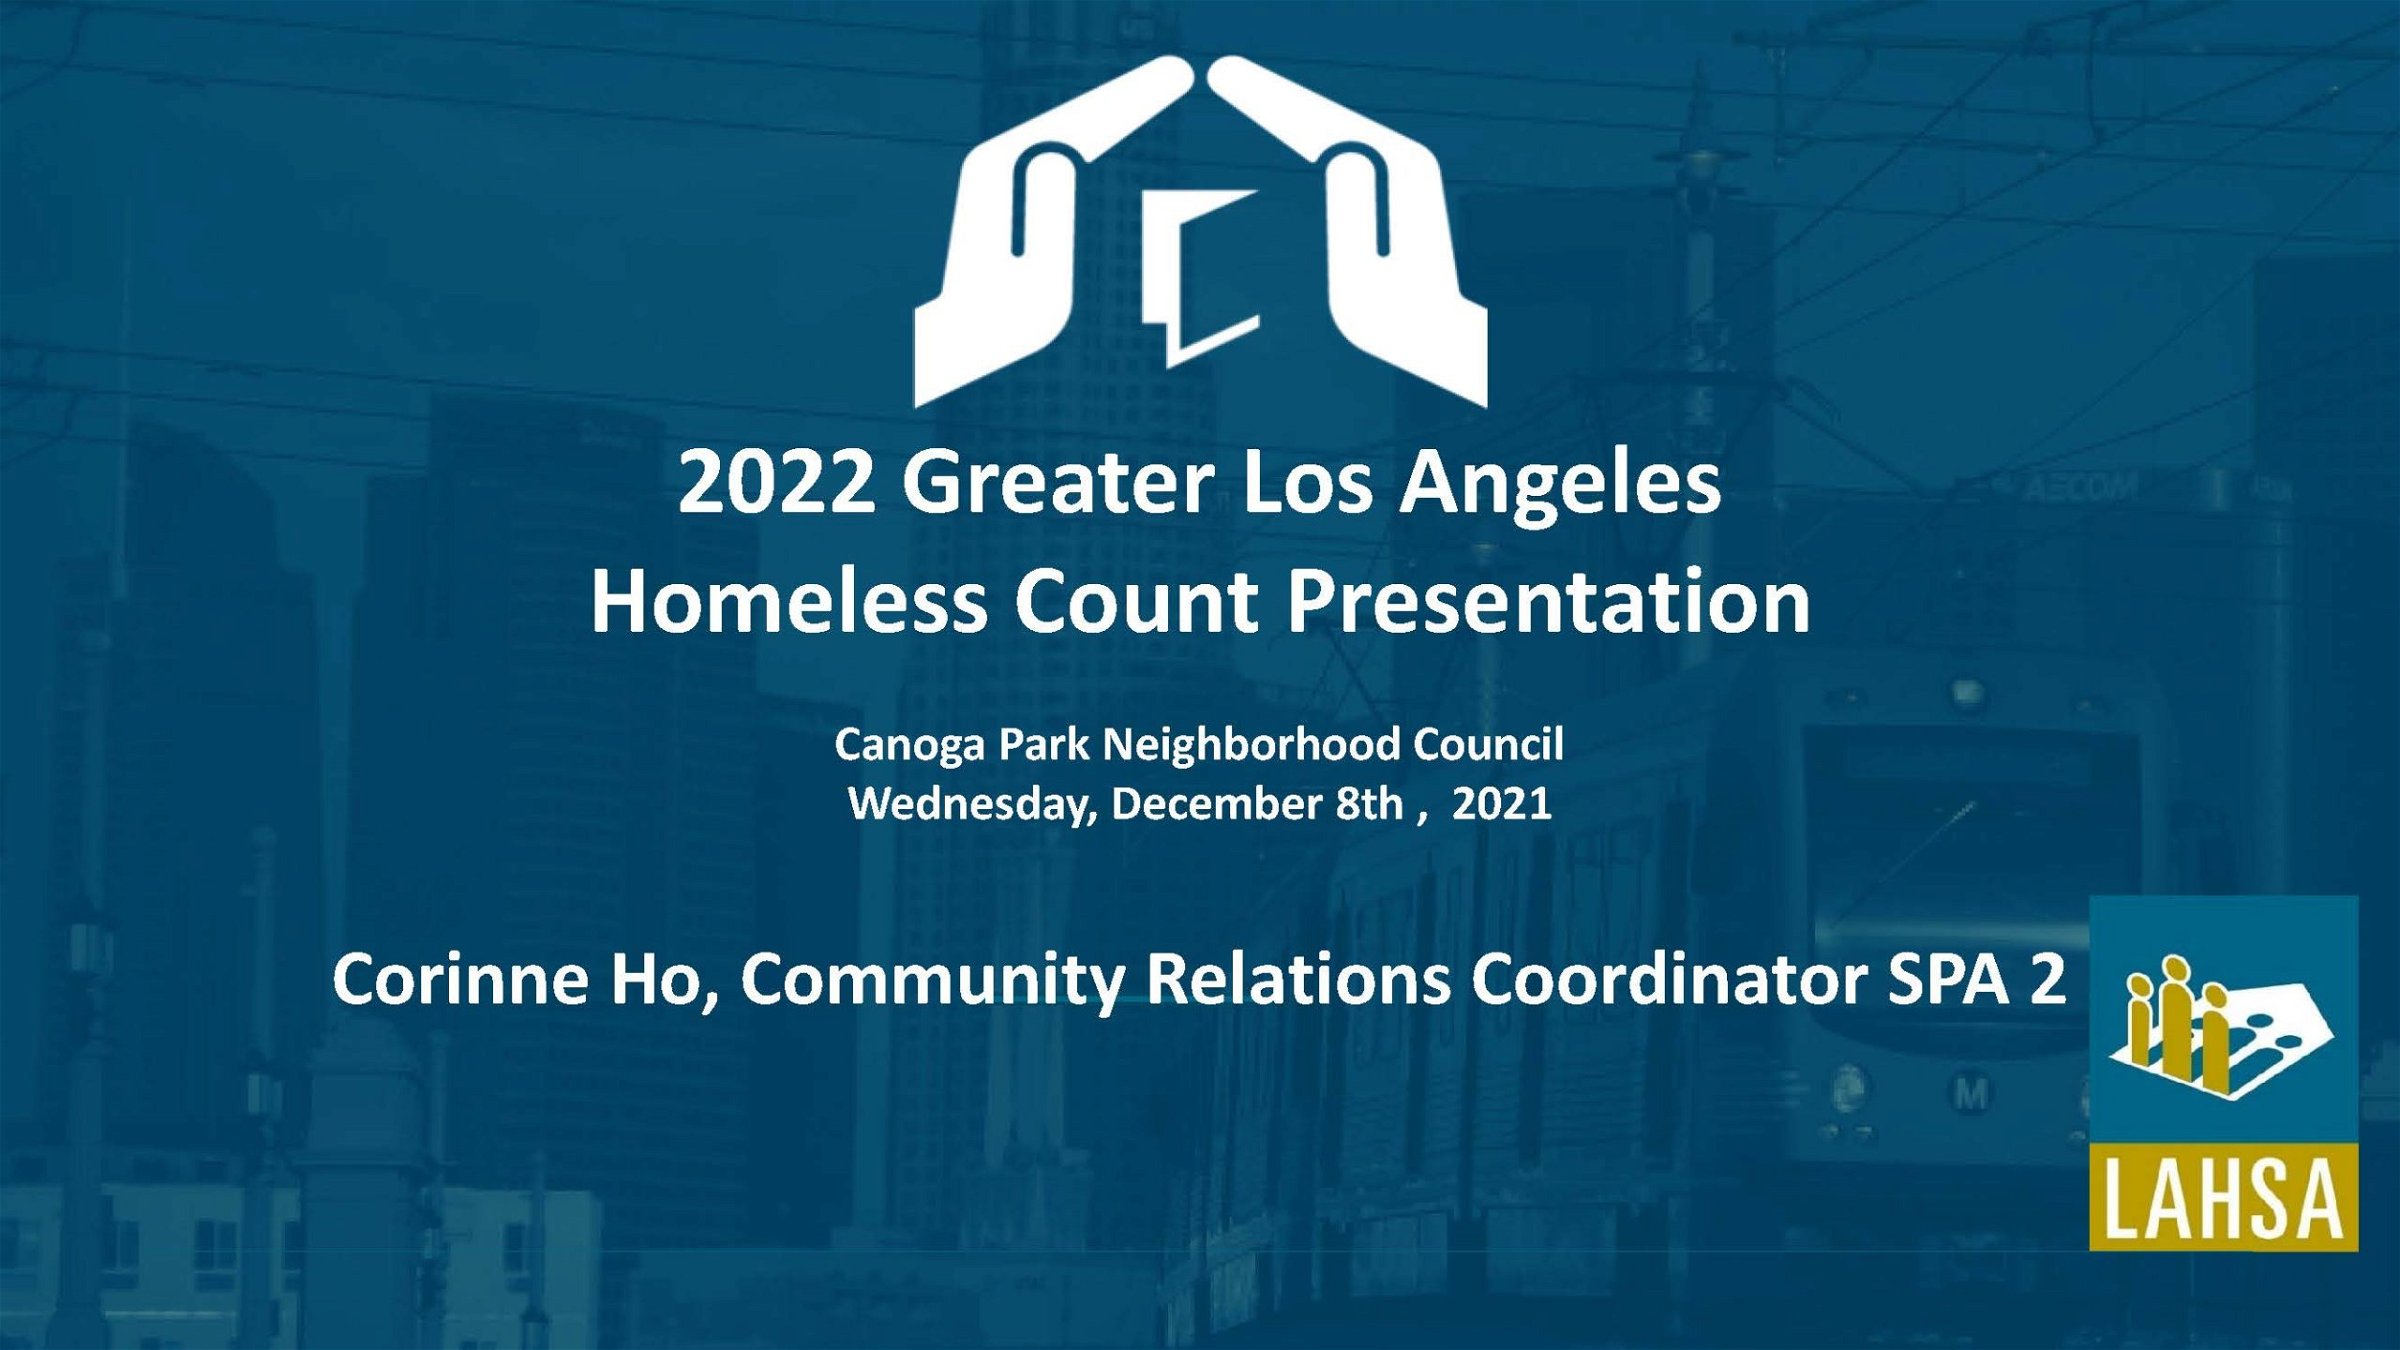 2022 Greater Los Angeles Homeless Count Presentation